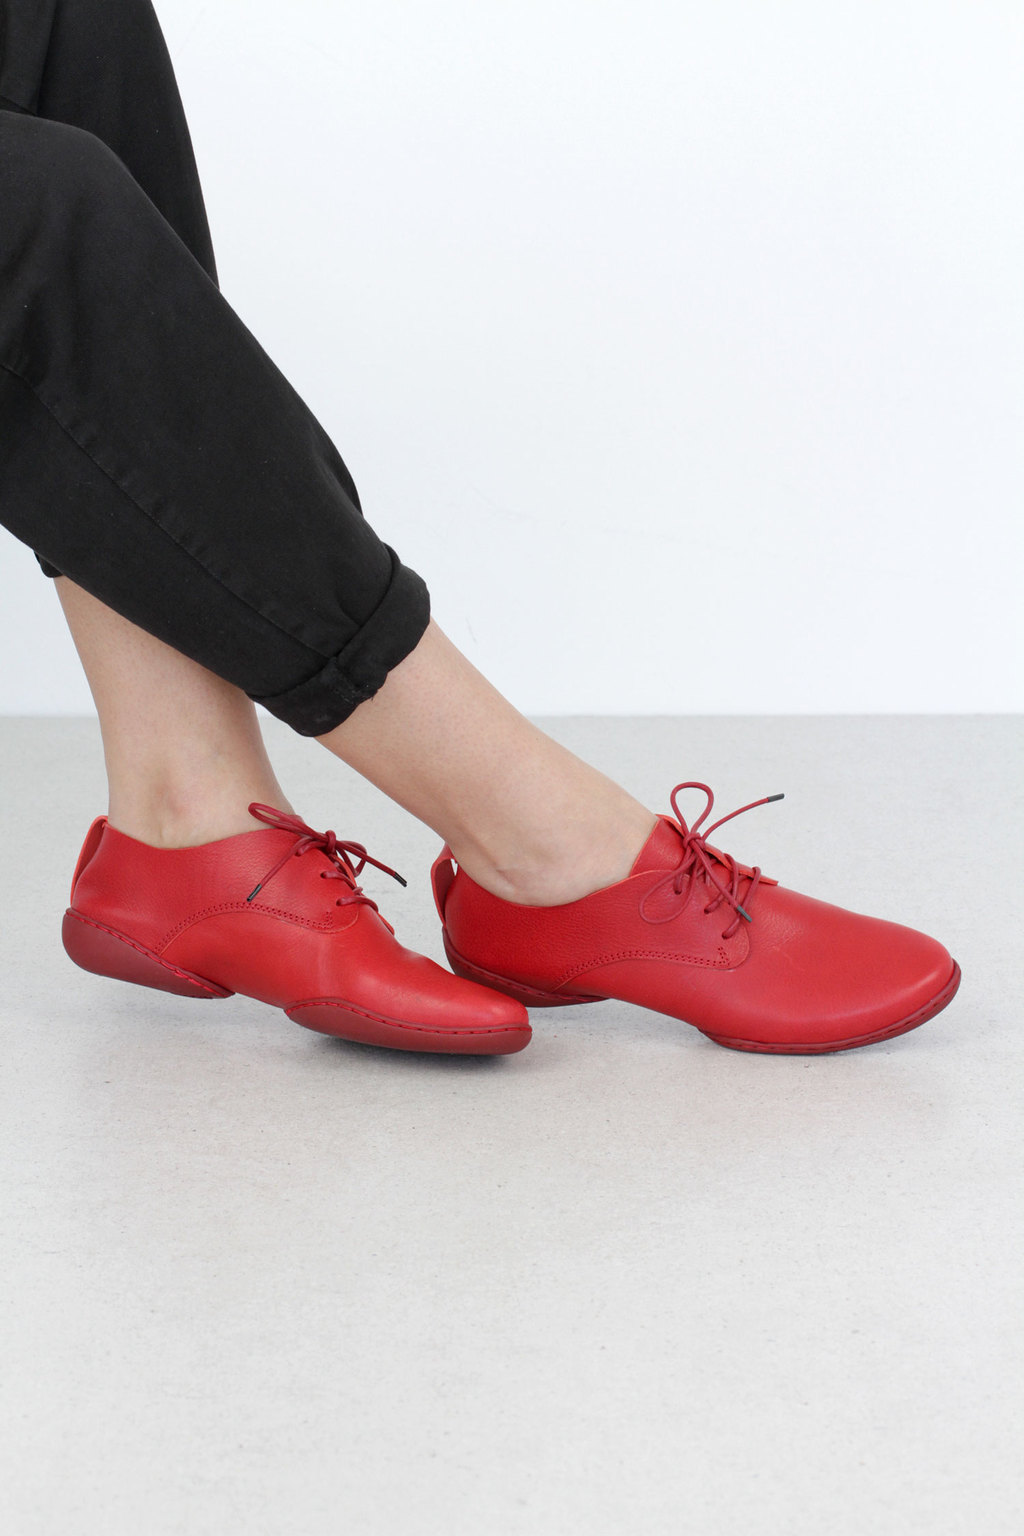 Pot f - Trippen shoes - exceptional design and quality from Germany